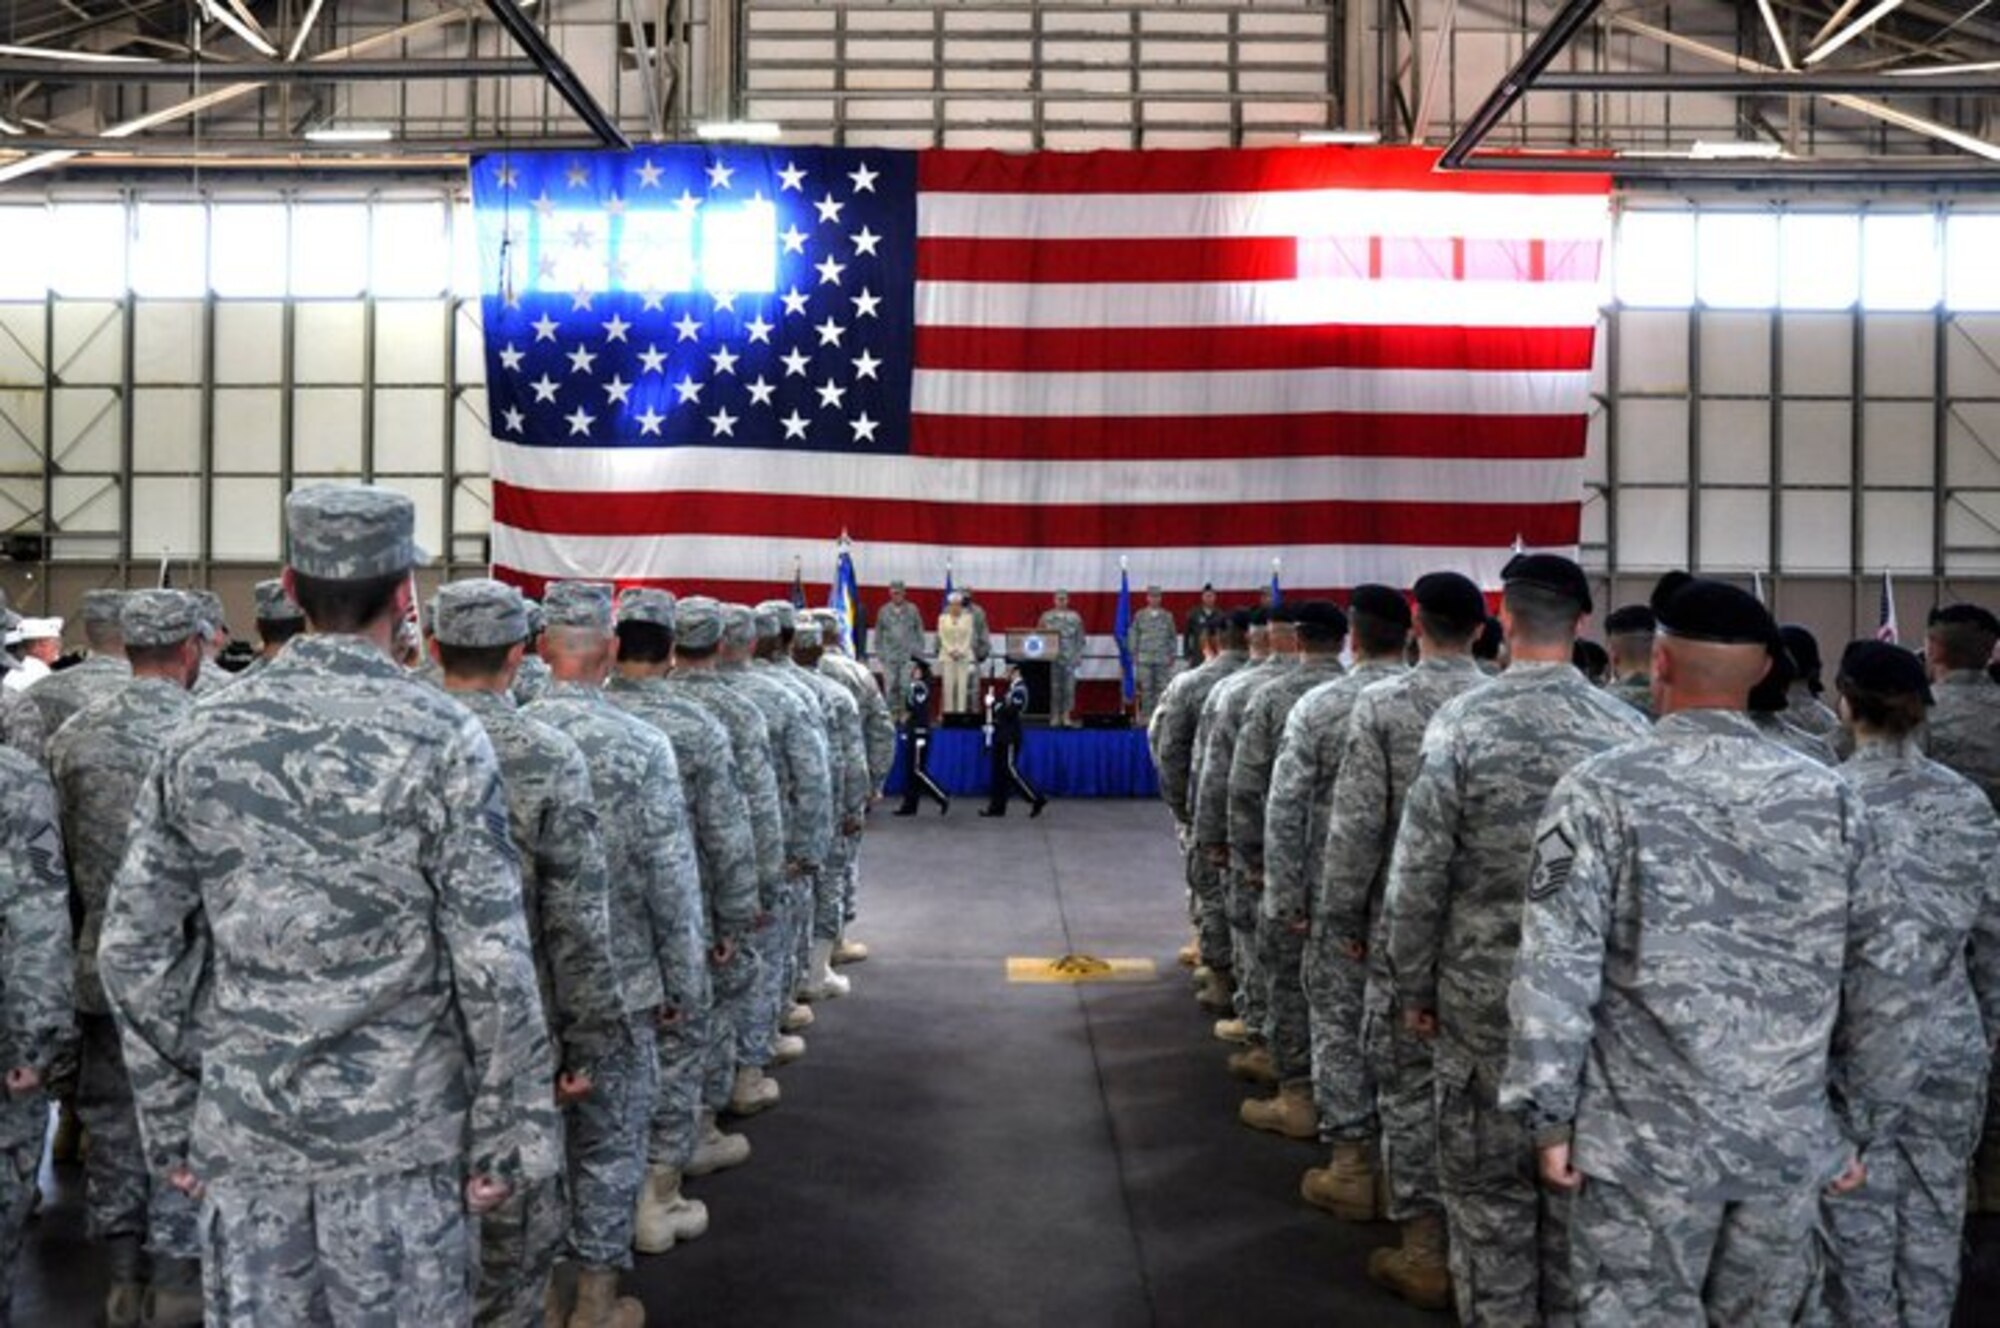 Members of the 103rd Security Forces and Civil Engineer Squadrons, 103rd Airlift Wing, are assembled in formation during a formal Send Off Ceremony July 6, 2011, at Bradley Air National Guard Base, East Granby, Conn. Approximately 80 Connecticut Air National Guardsmen with the 103rd Airlift Wing have since deployed to Afghanistan in support of Operation Enduring Freedom.  (U.S. Air Force photo by Army 2nd Lt. Emily Hein) 